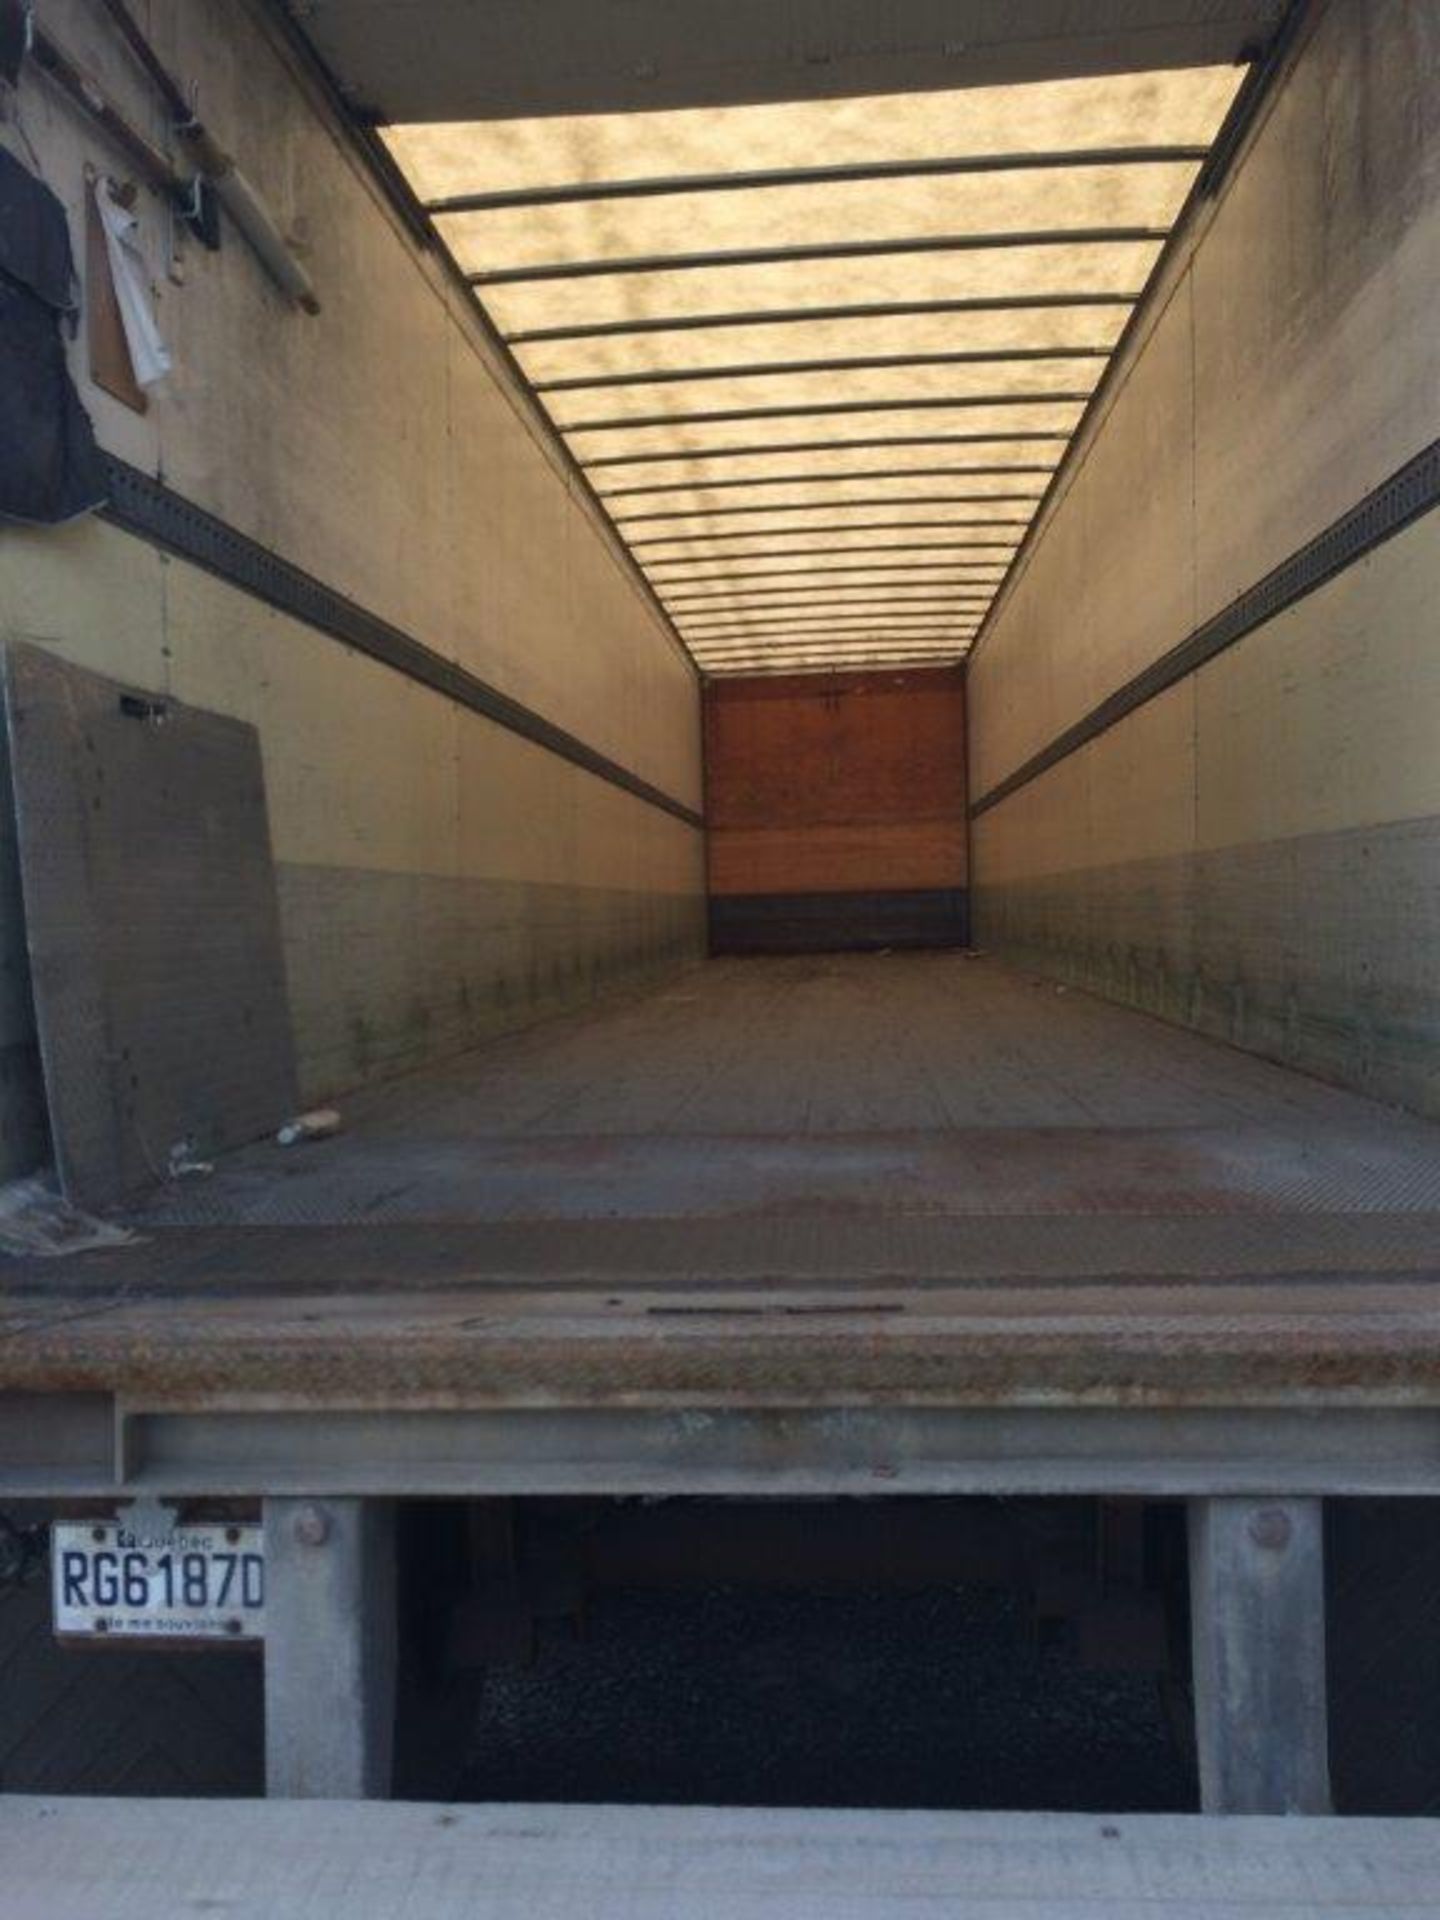 2007 Trailmobile Trailer, Dry Box 45' Rail Gate 6600 lbs, Year: 2007, approx miles: 234,693 miles, - Image 4 of 6